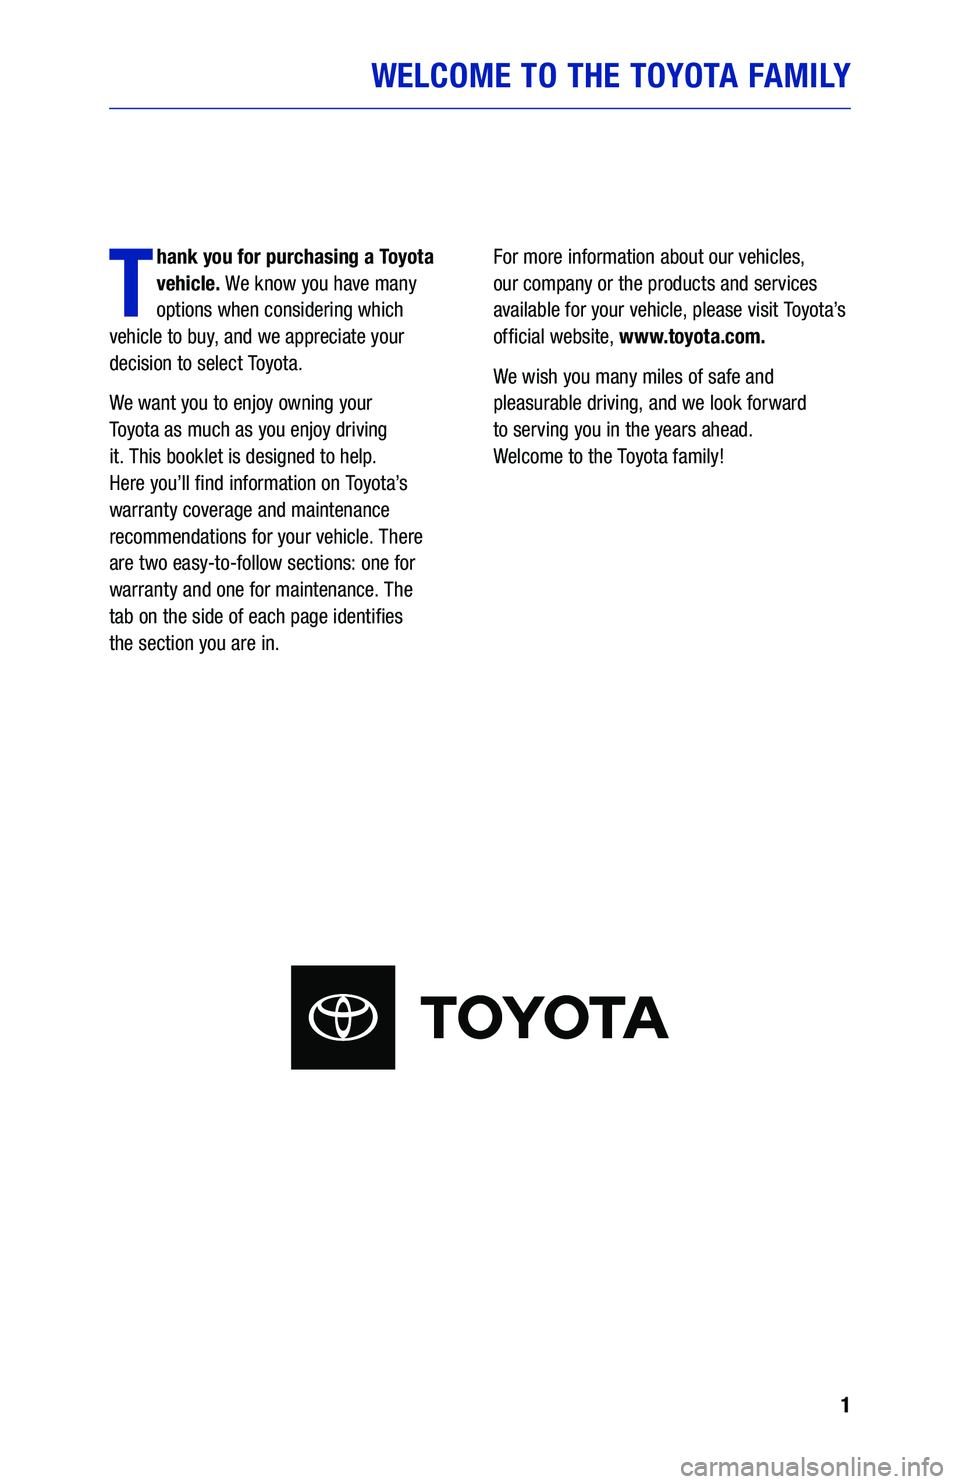 TOYOTA C-HR 2021  Warranties & Maintenance Guides (in English) 1
WELCOME TO THE TOYOTA FAMILY
T
hank you for purchasing a Toyota 
vehicle. We know you have many 
options when considering which  
vehicle to buy, and we appreciate your 
decision to select Toyota.
W